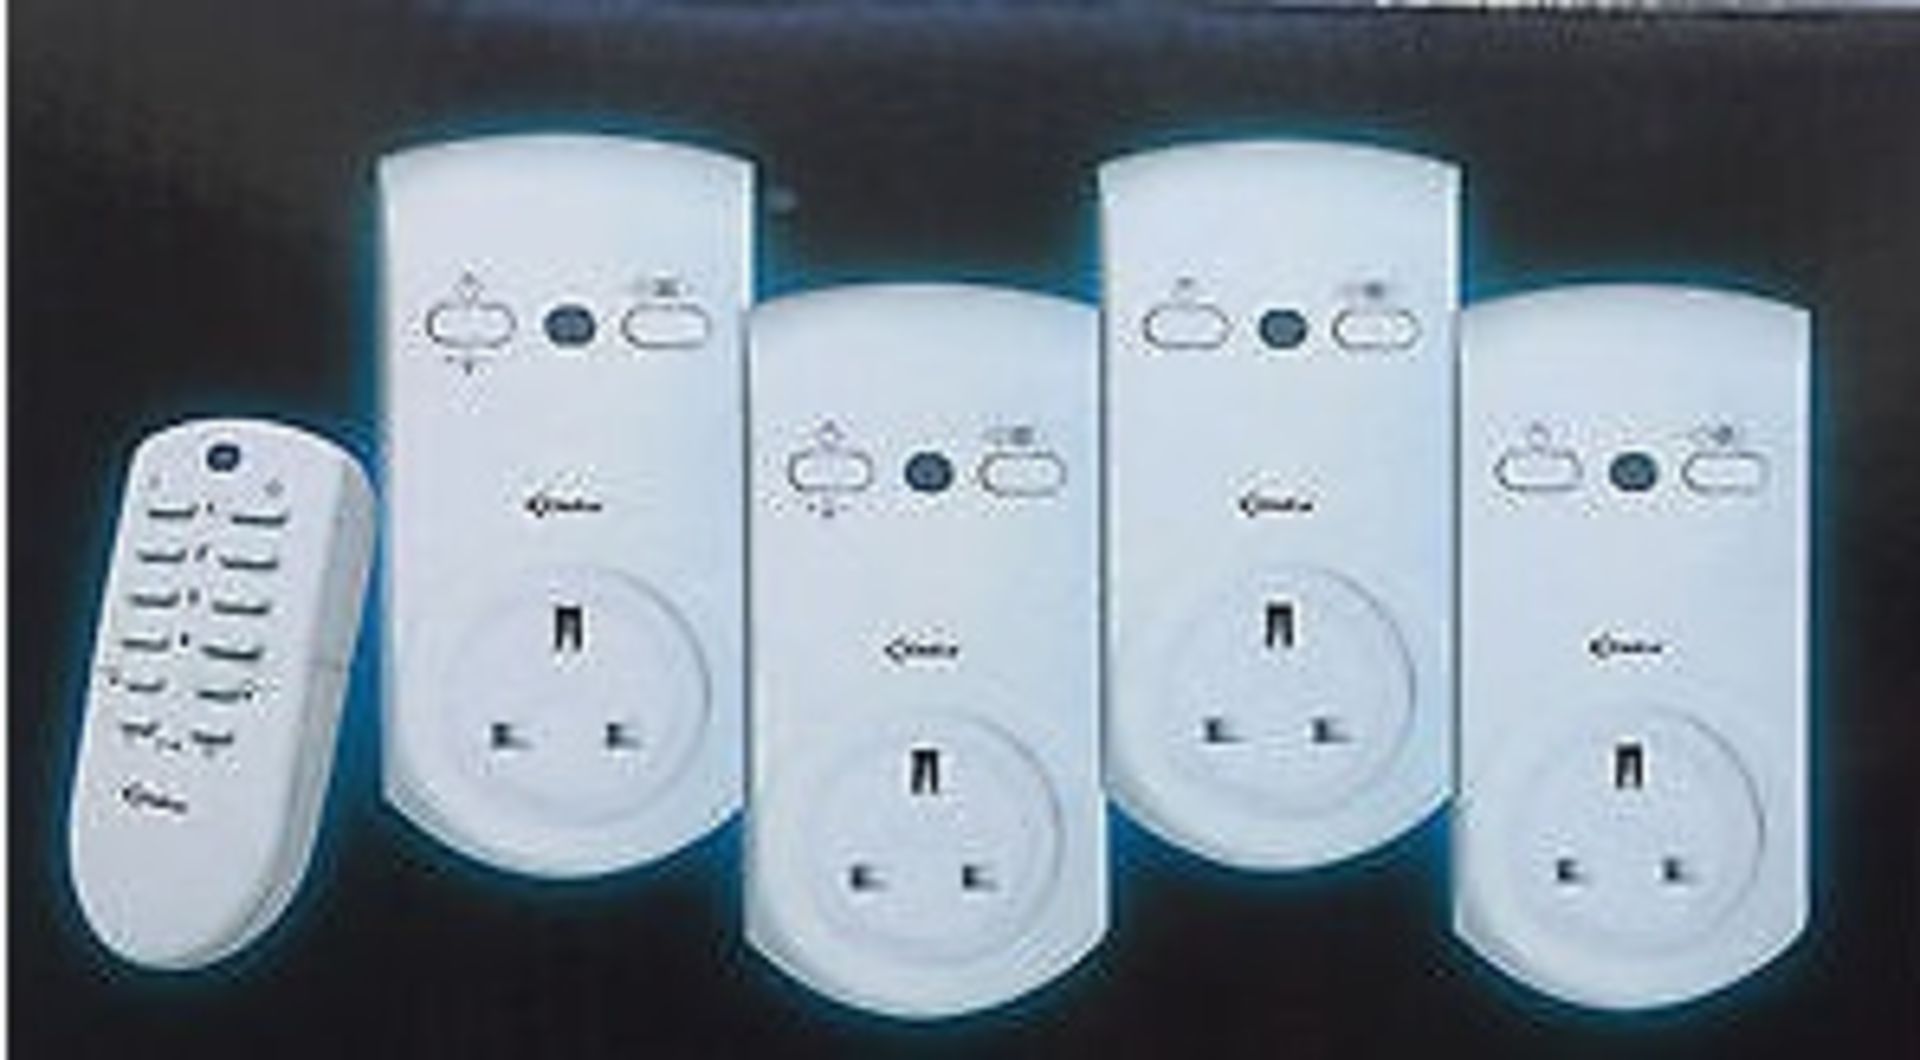 V Brand New Remote Controlled Wall Sockets with 4 x Receivers - Programmable Remote Control with a